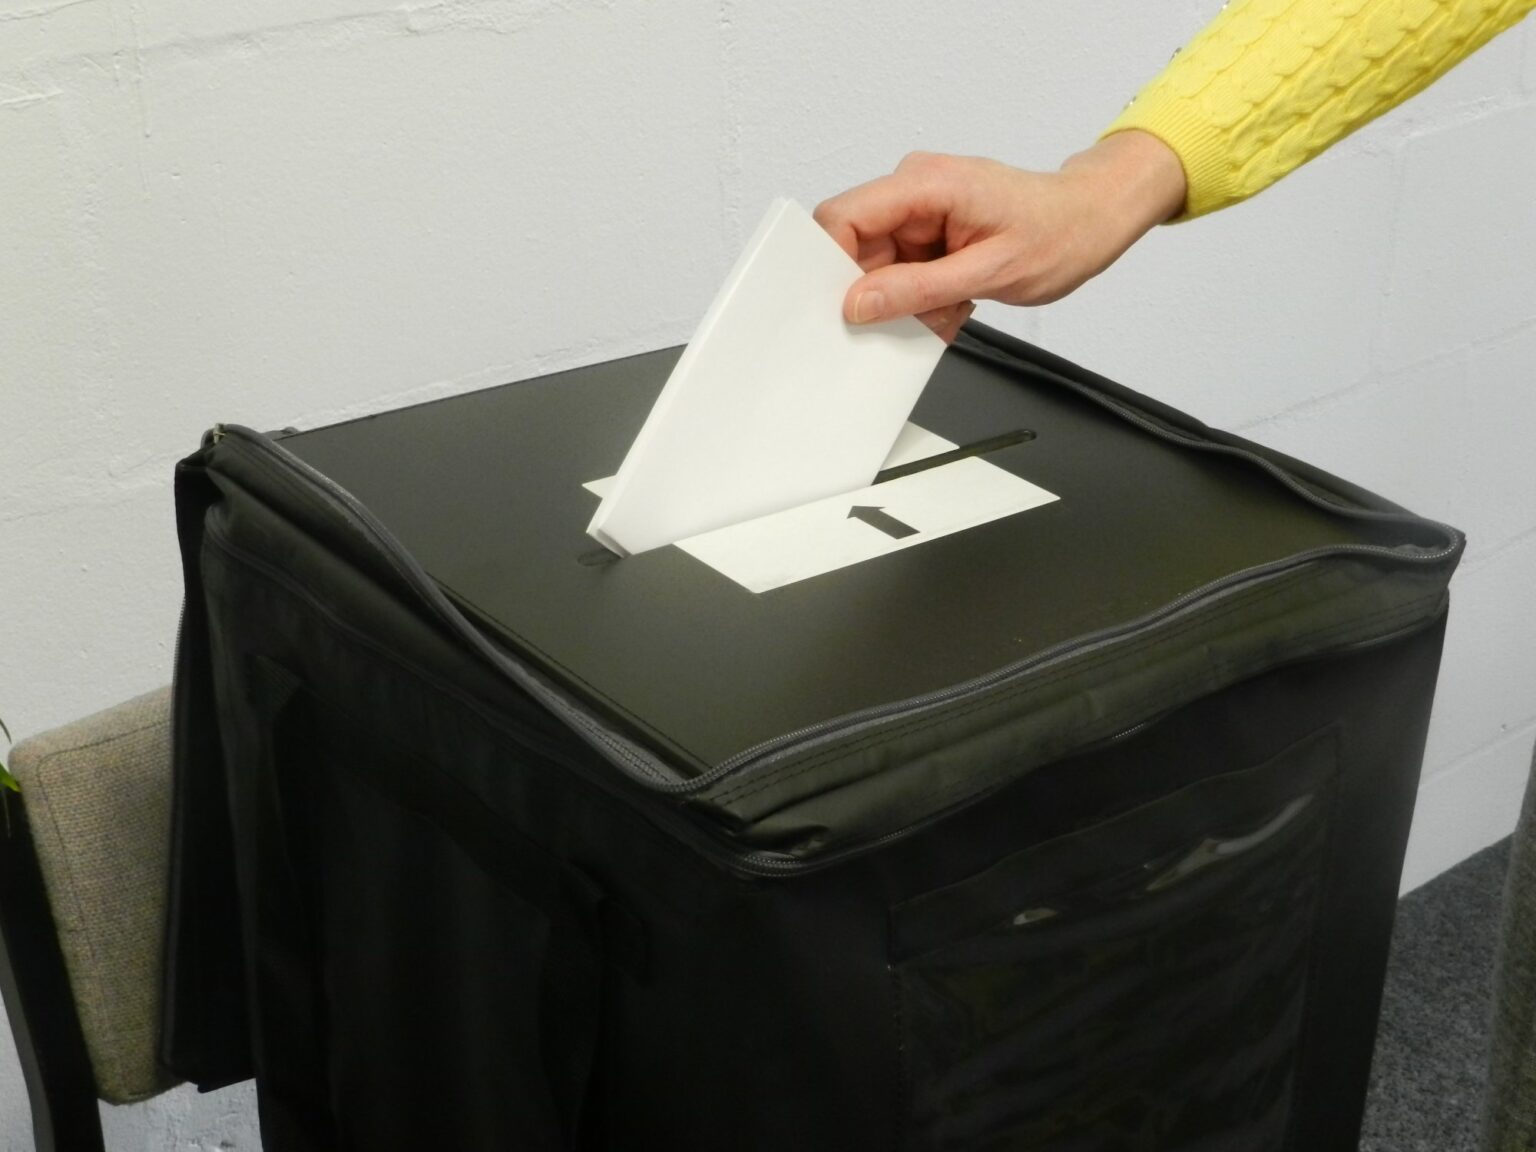 A hand putting a polling card in a ballot box